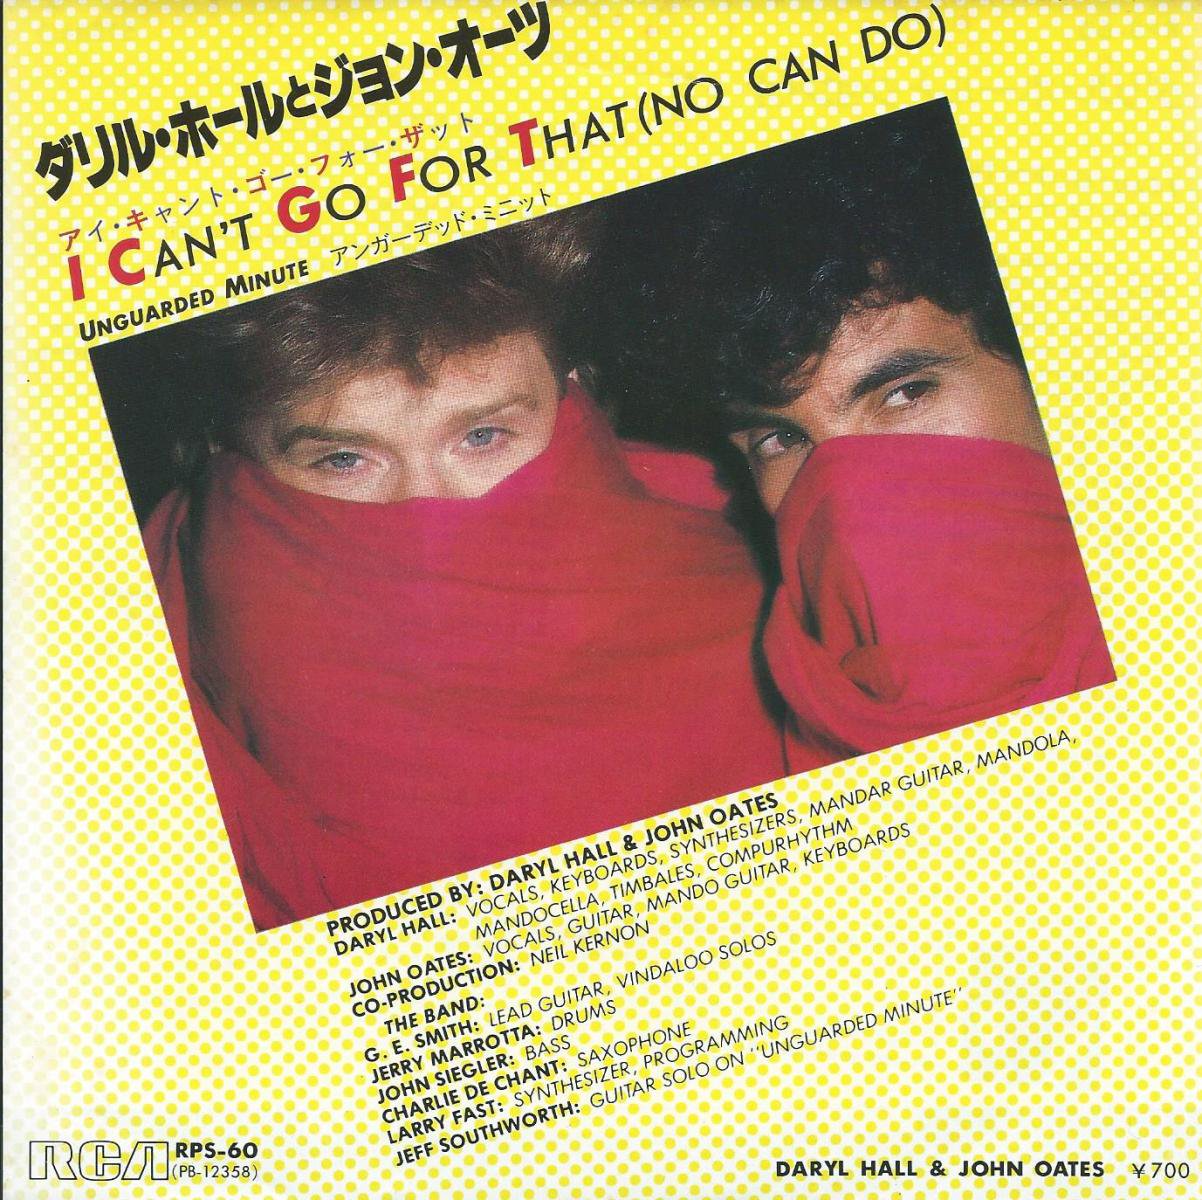 DARYL HALL & JOHN OATES ダリル・ホールとジョン・オーツ / I CAN'T GO FOR THAT ( NO CAN DO)  (7